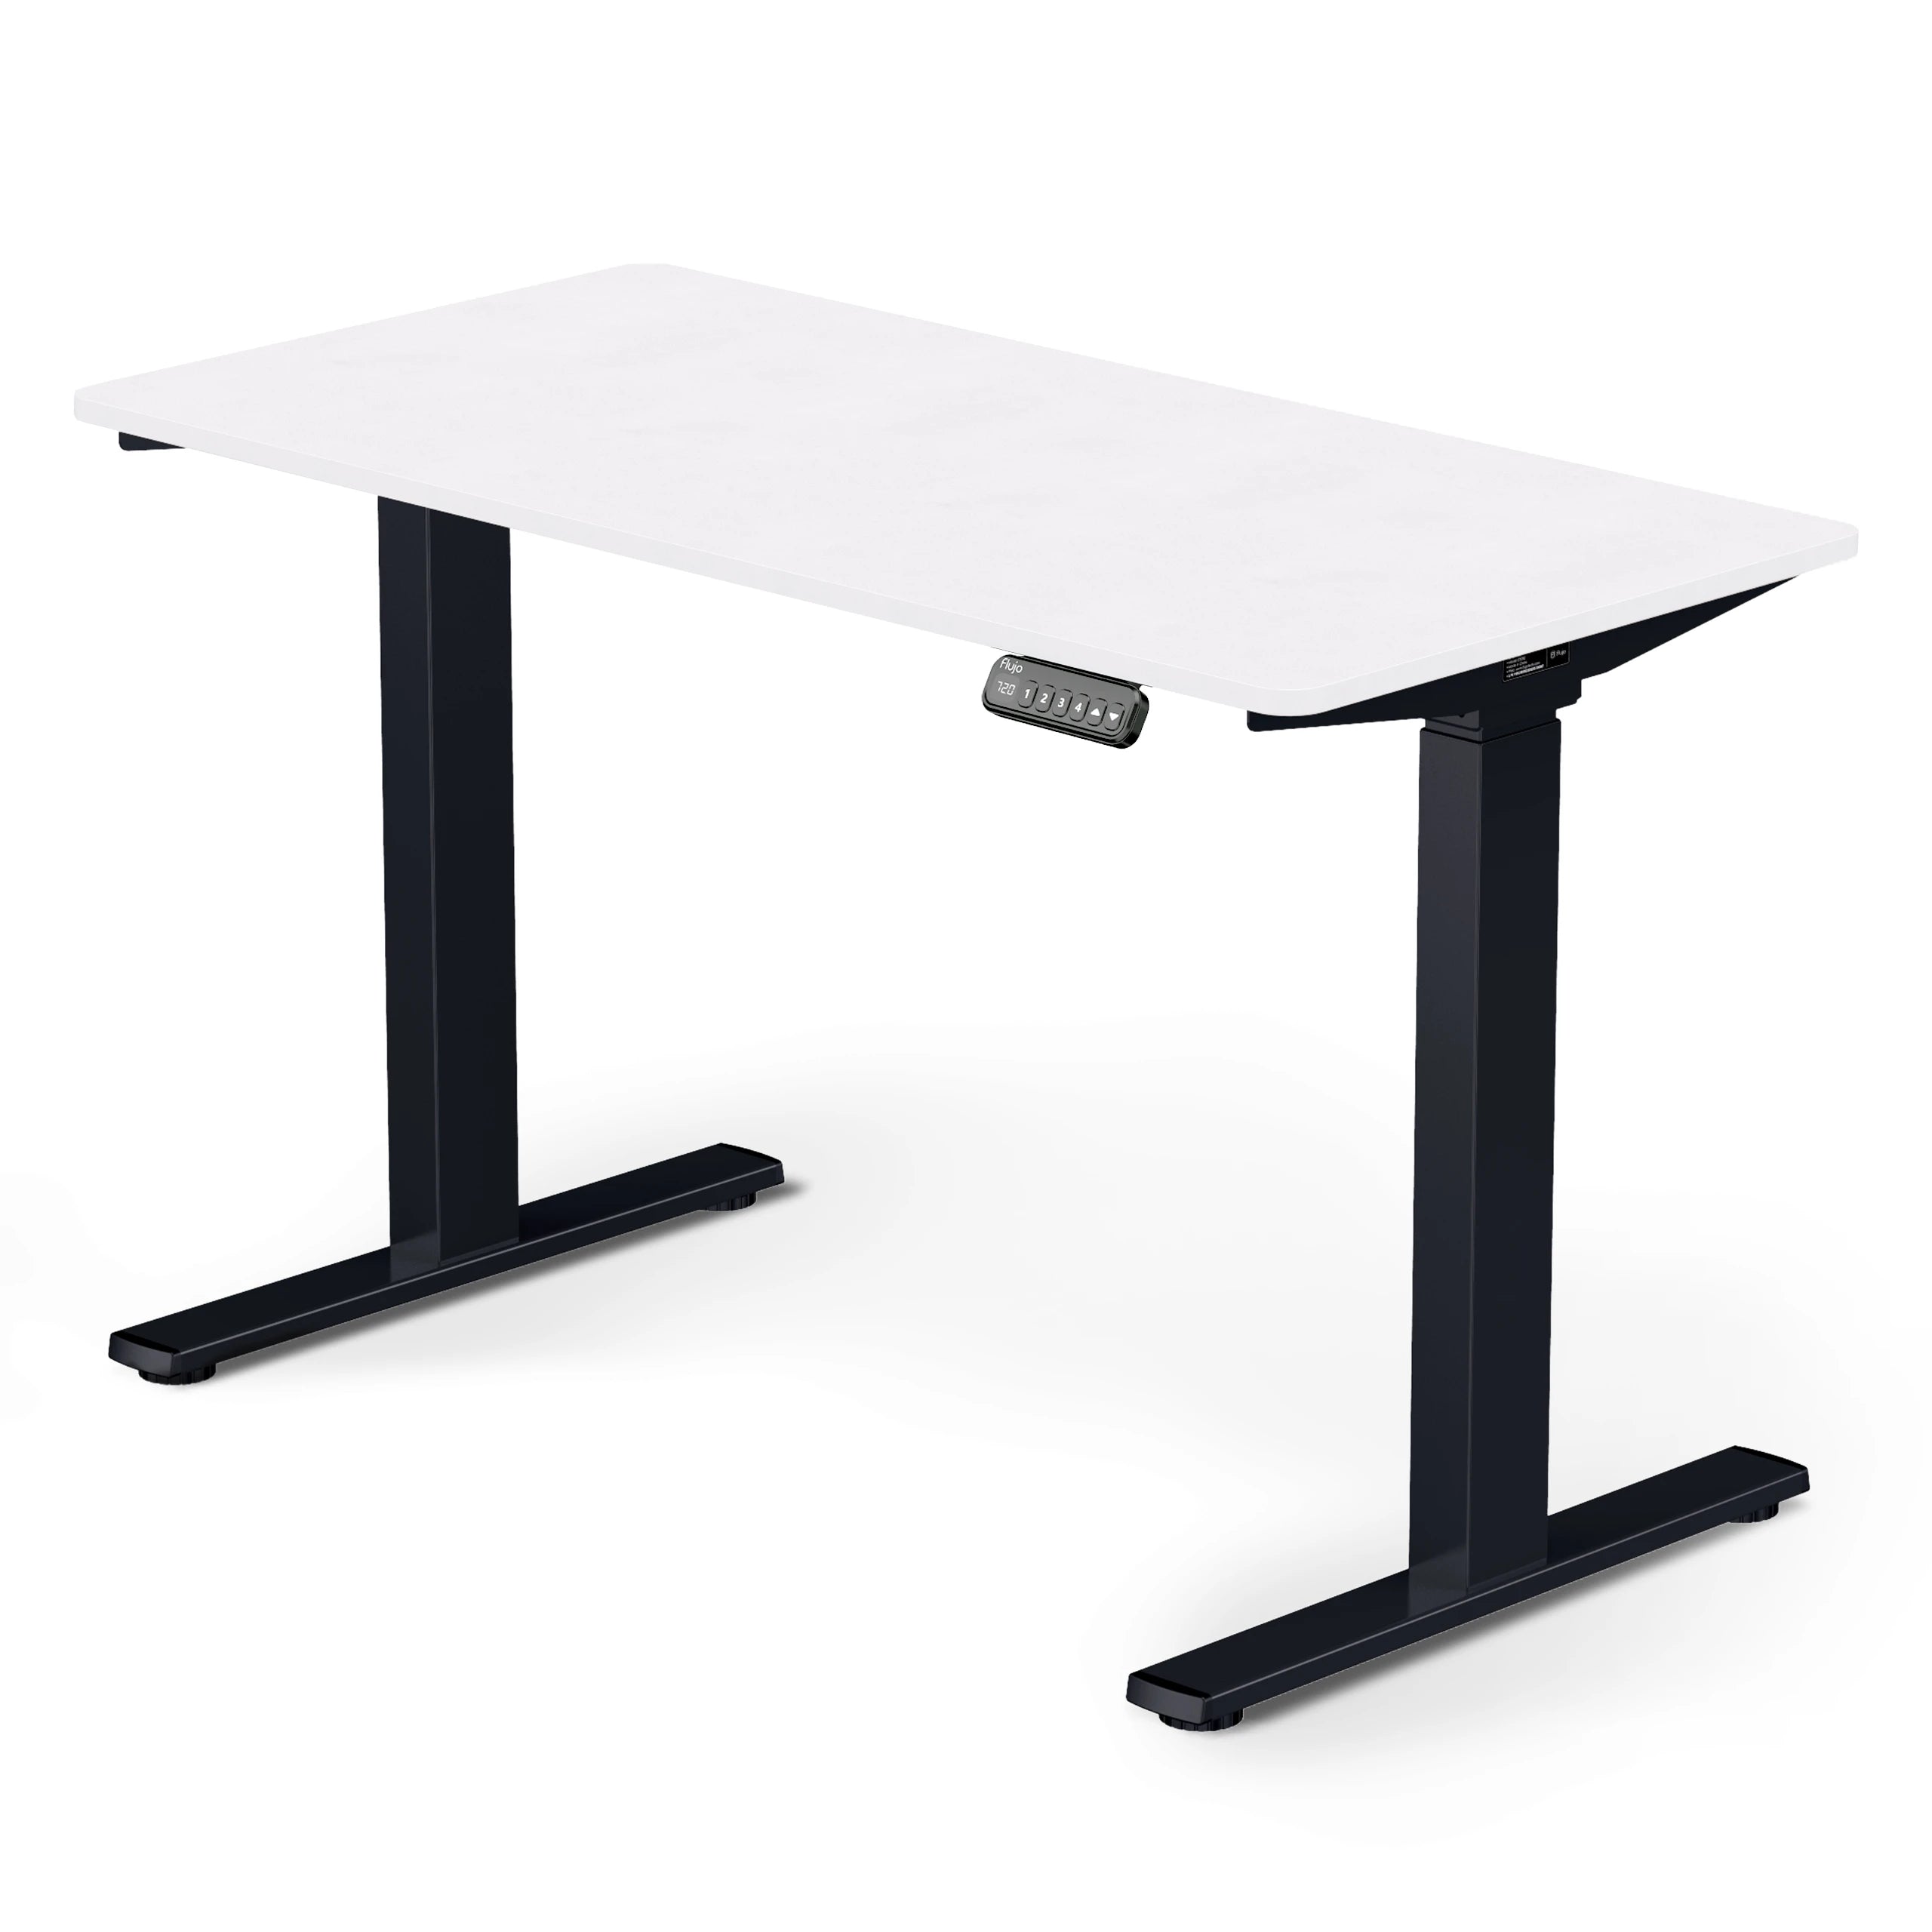 Adjustable height standing desk with a Warm White colour table  top and black legs frame, featuring a digital keypad control panel